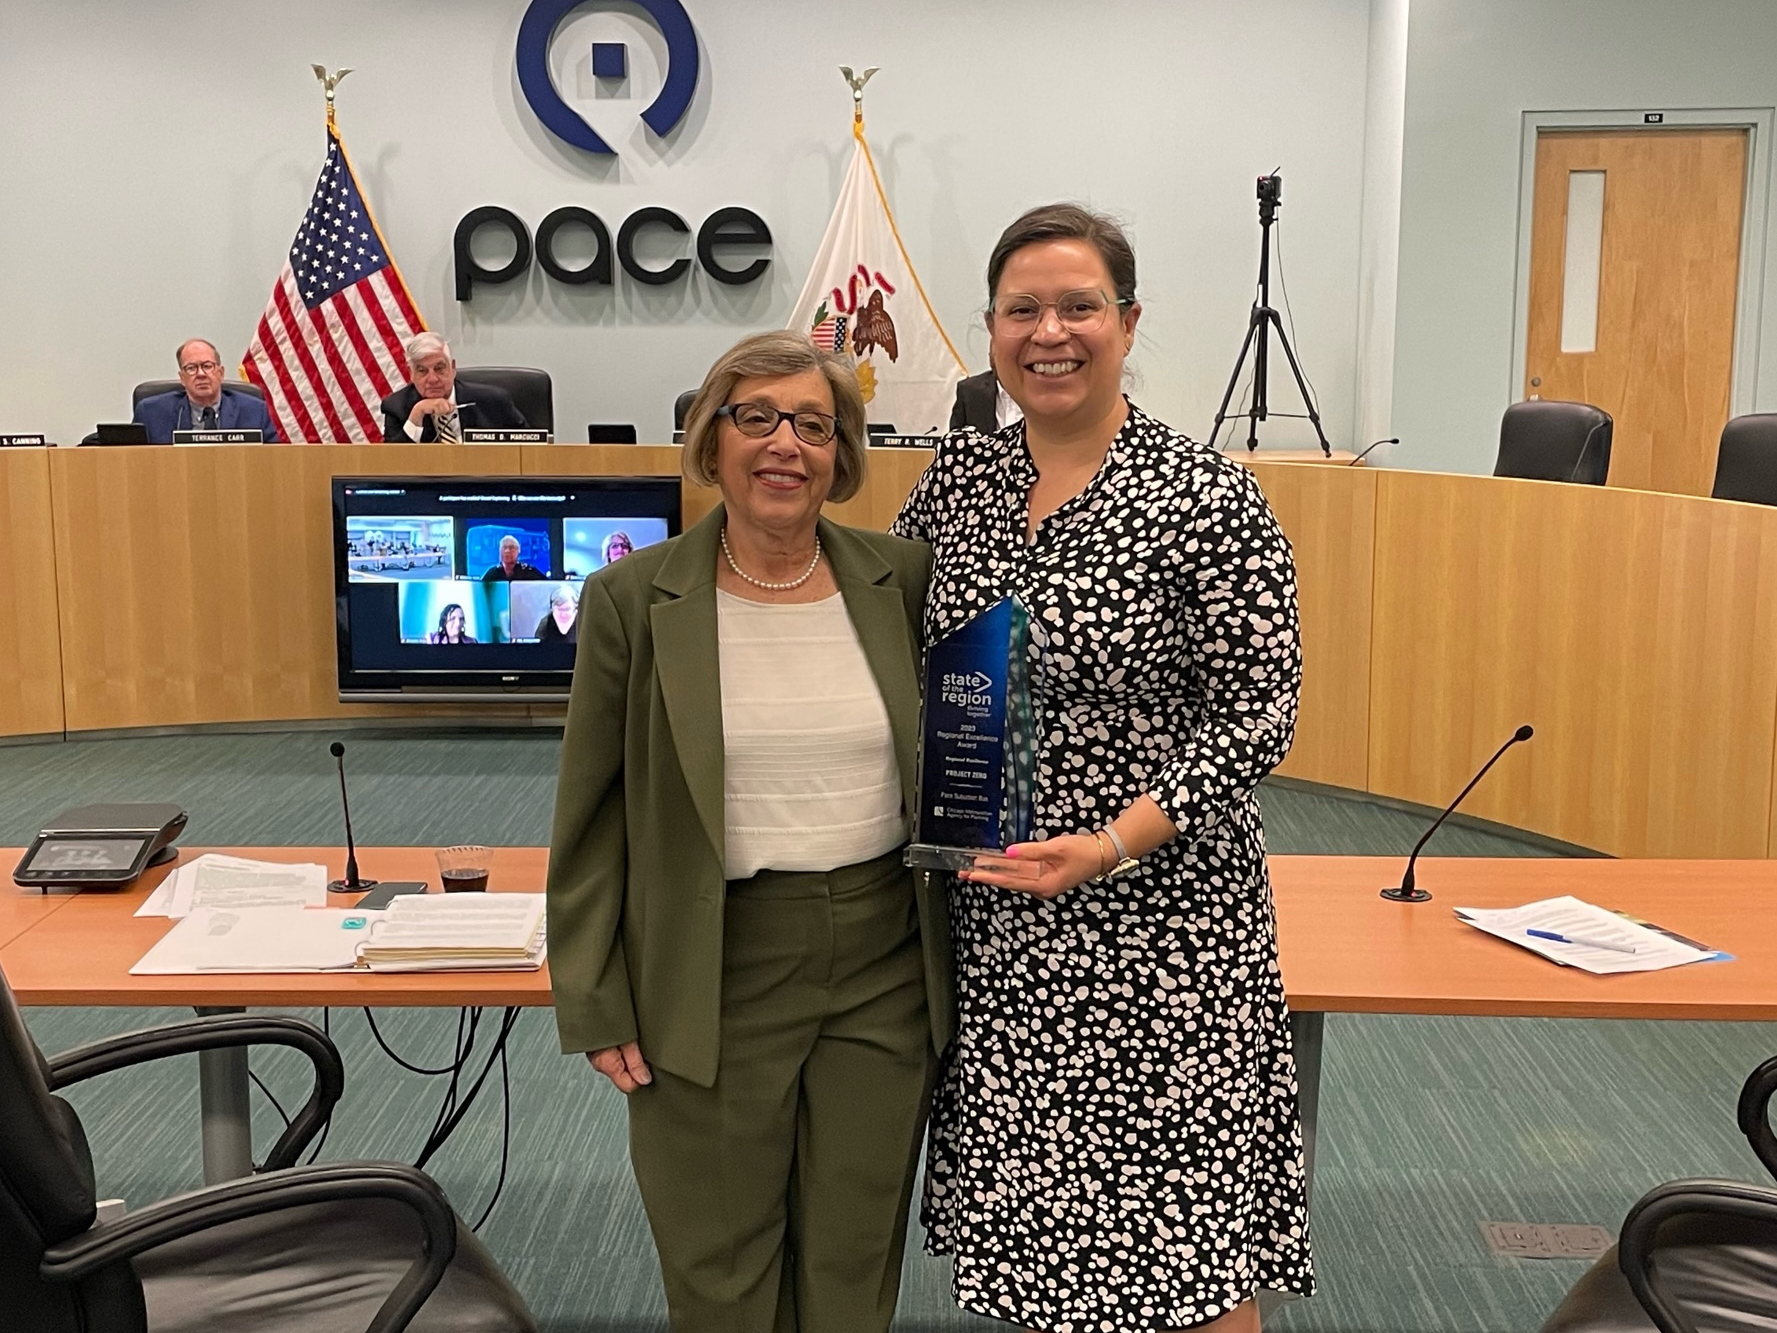 Erin Aleman of CMAP presents Pace with award